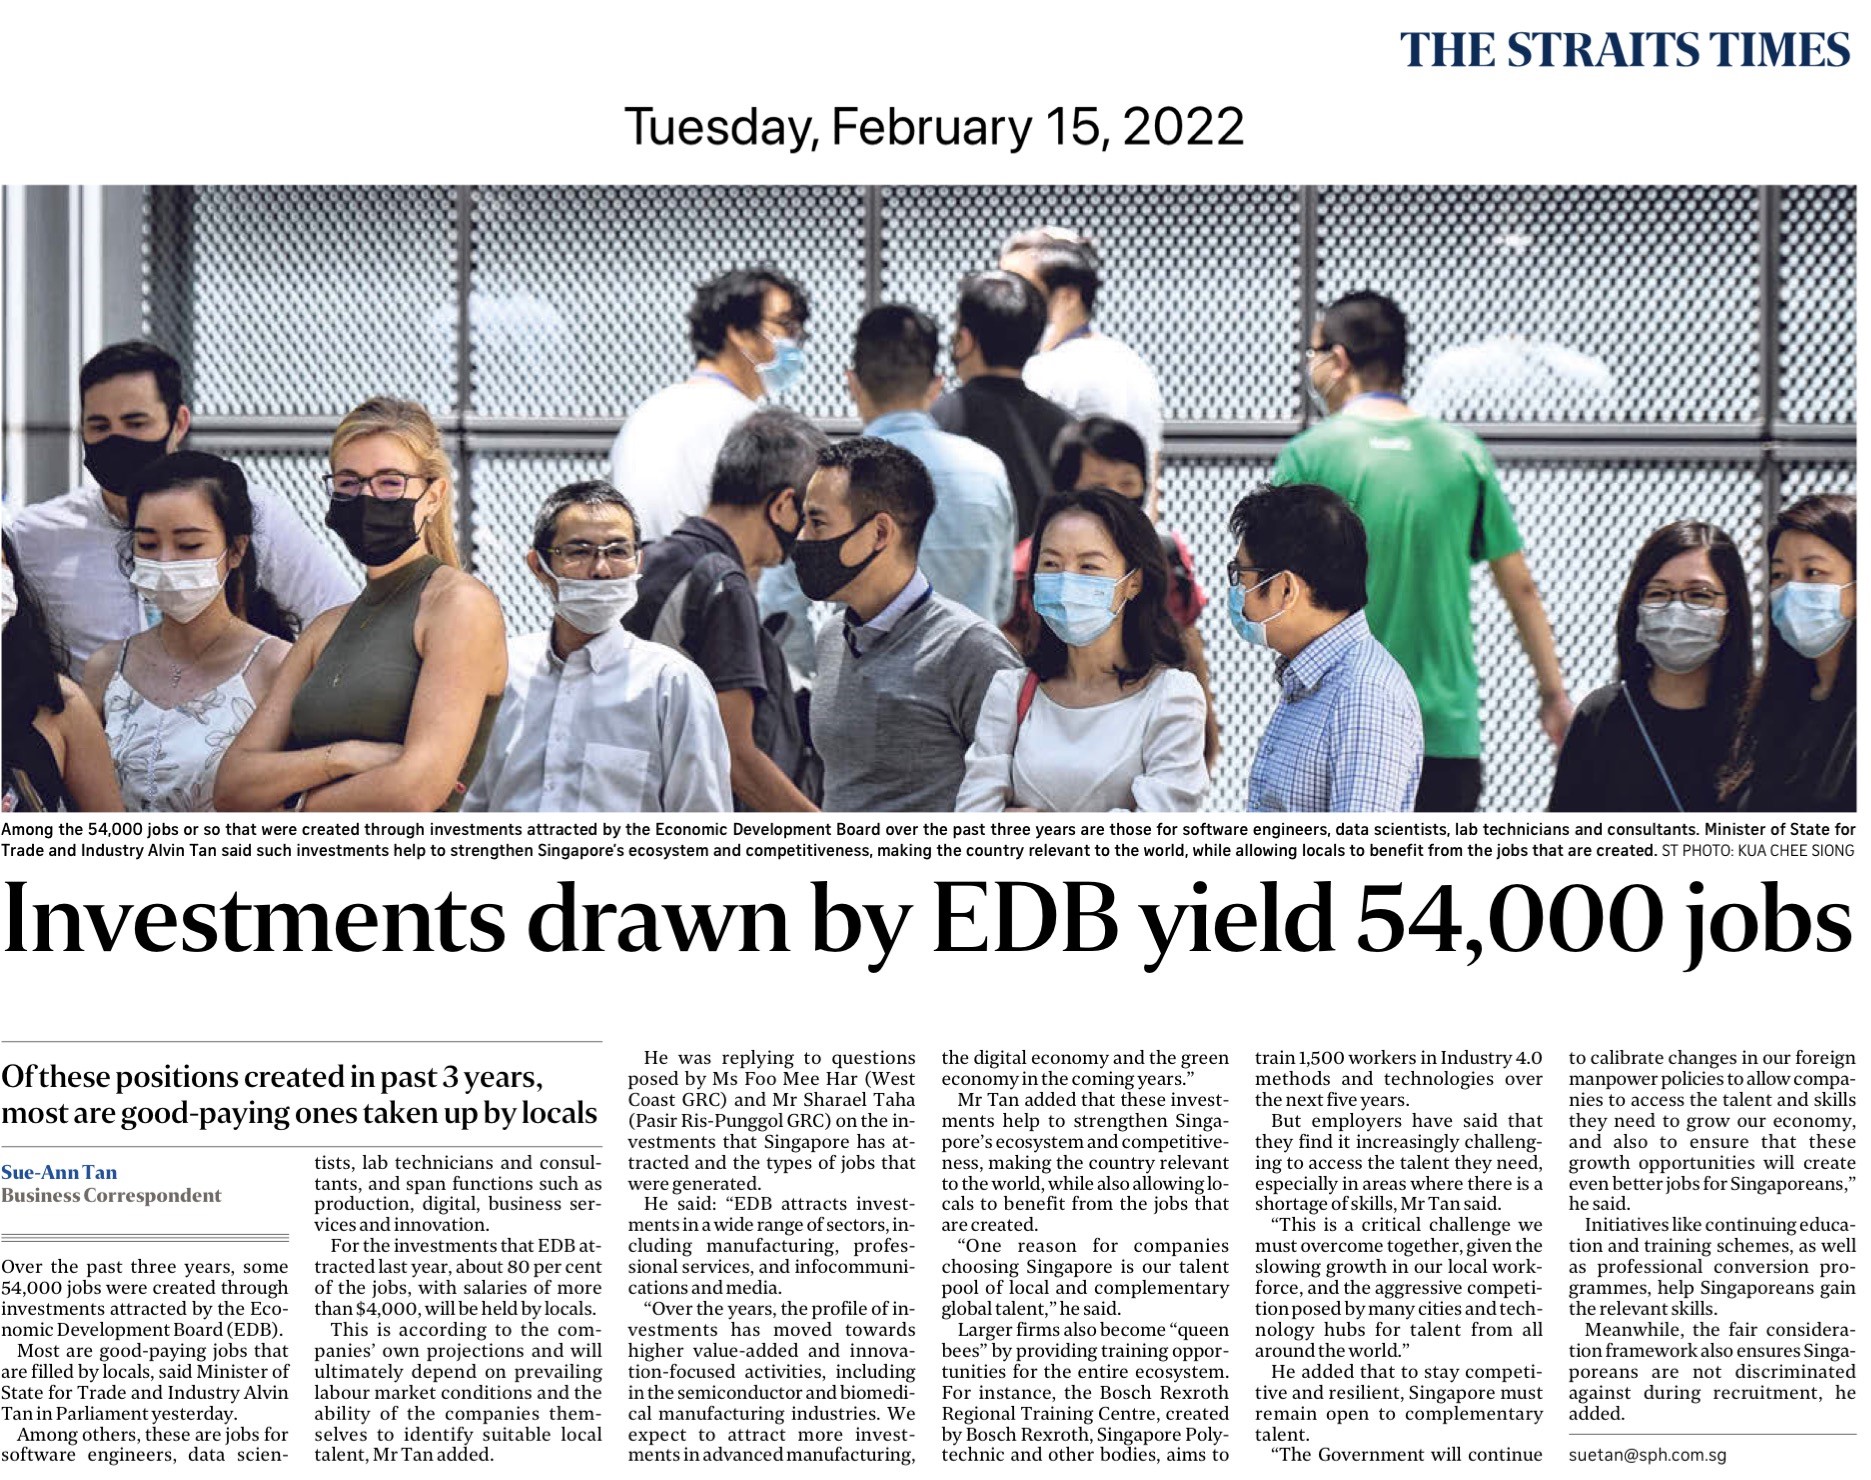 Investments drawn by EDB yield 54,000 jobs – The Straits Times, 15 February 2022